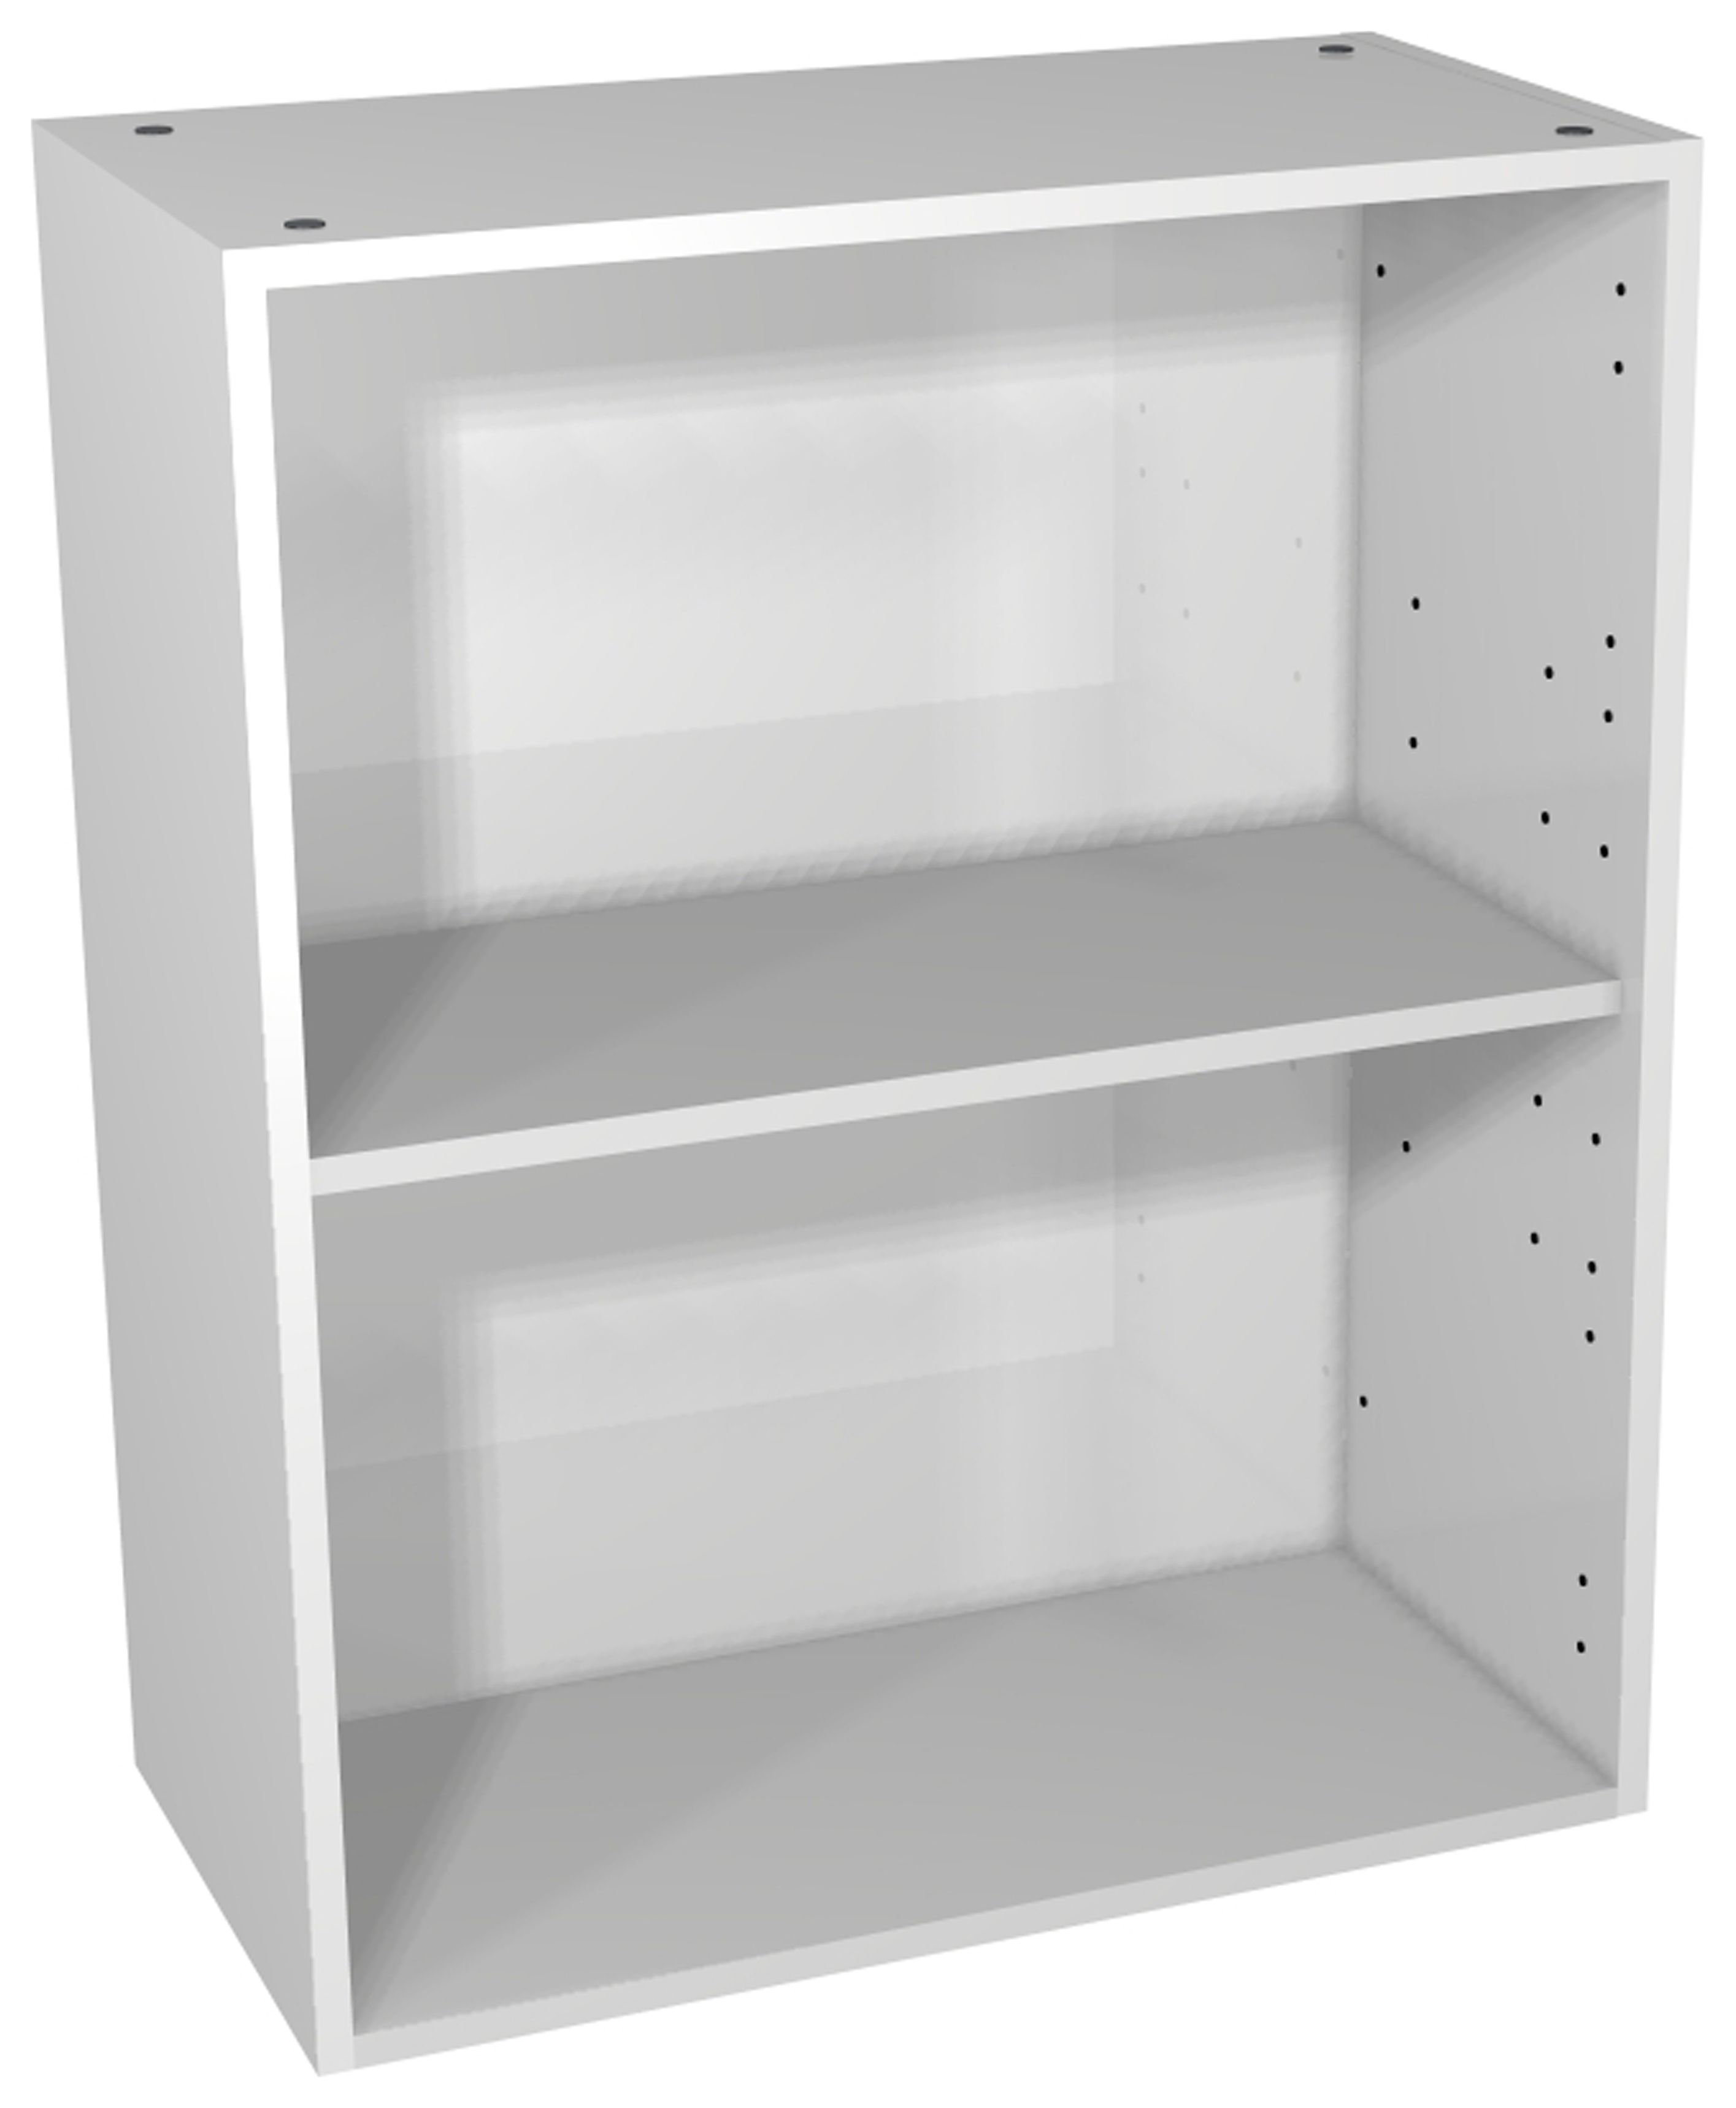 Image of Wickes Hertford Gloss Grey Open Display Unit - 600 x 735mm